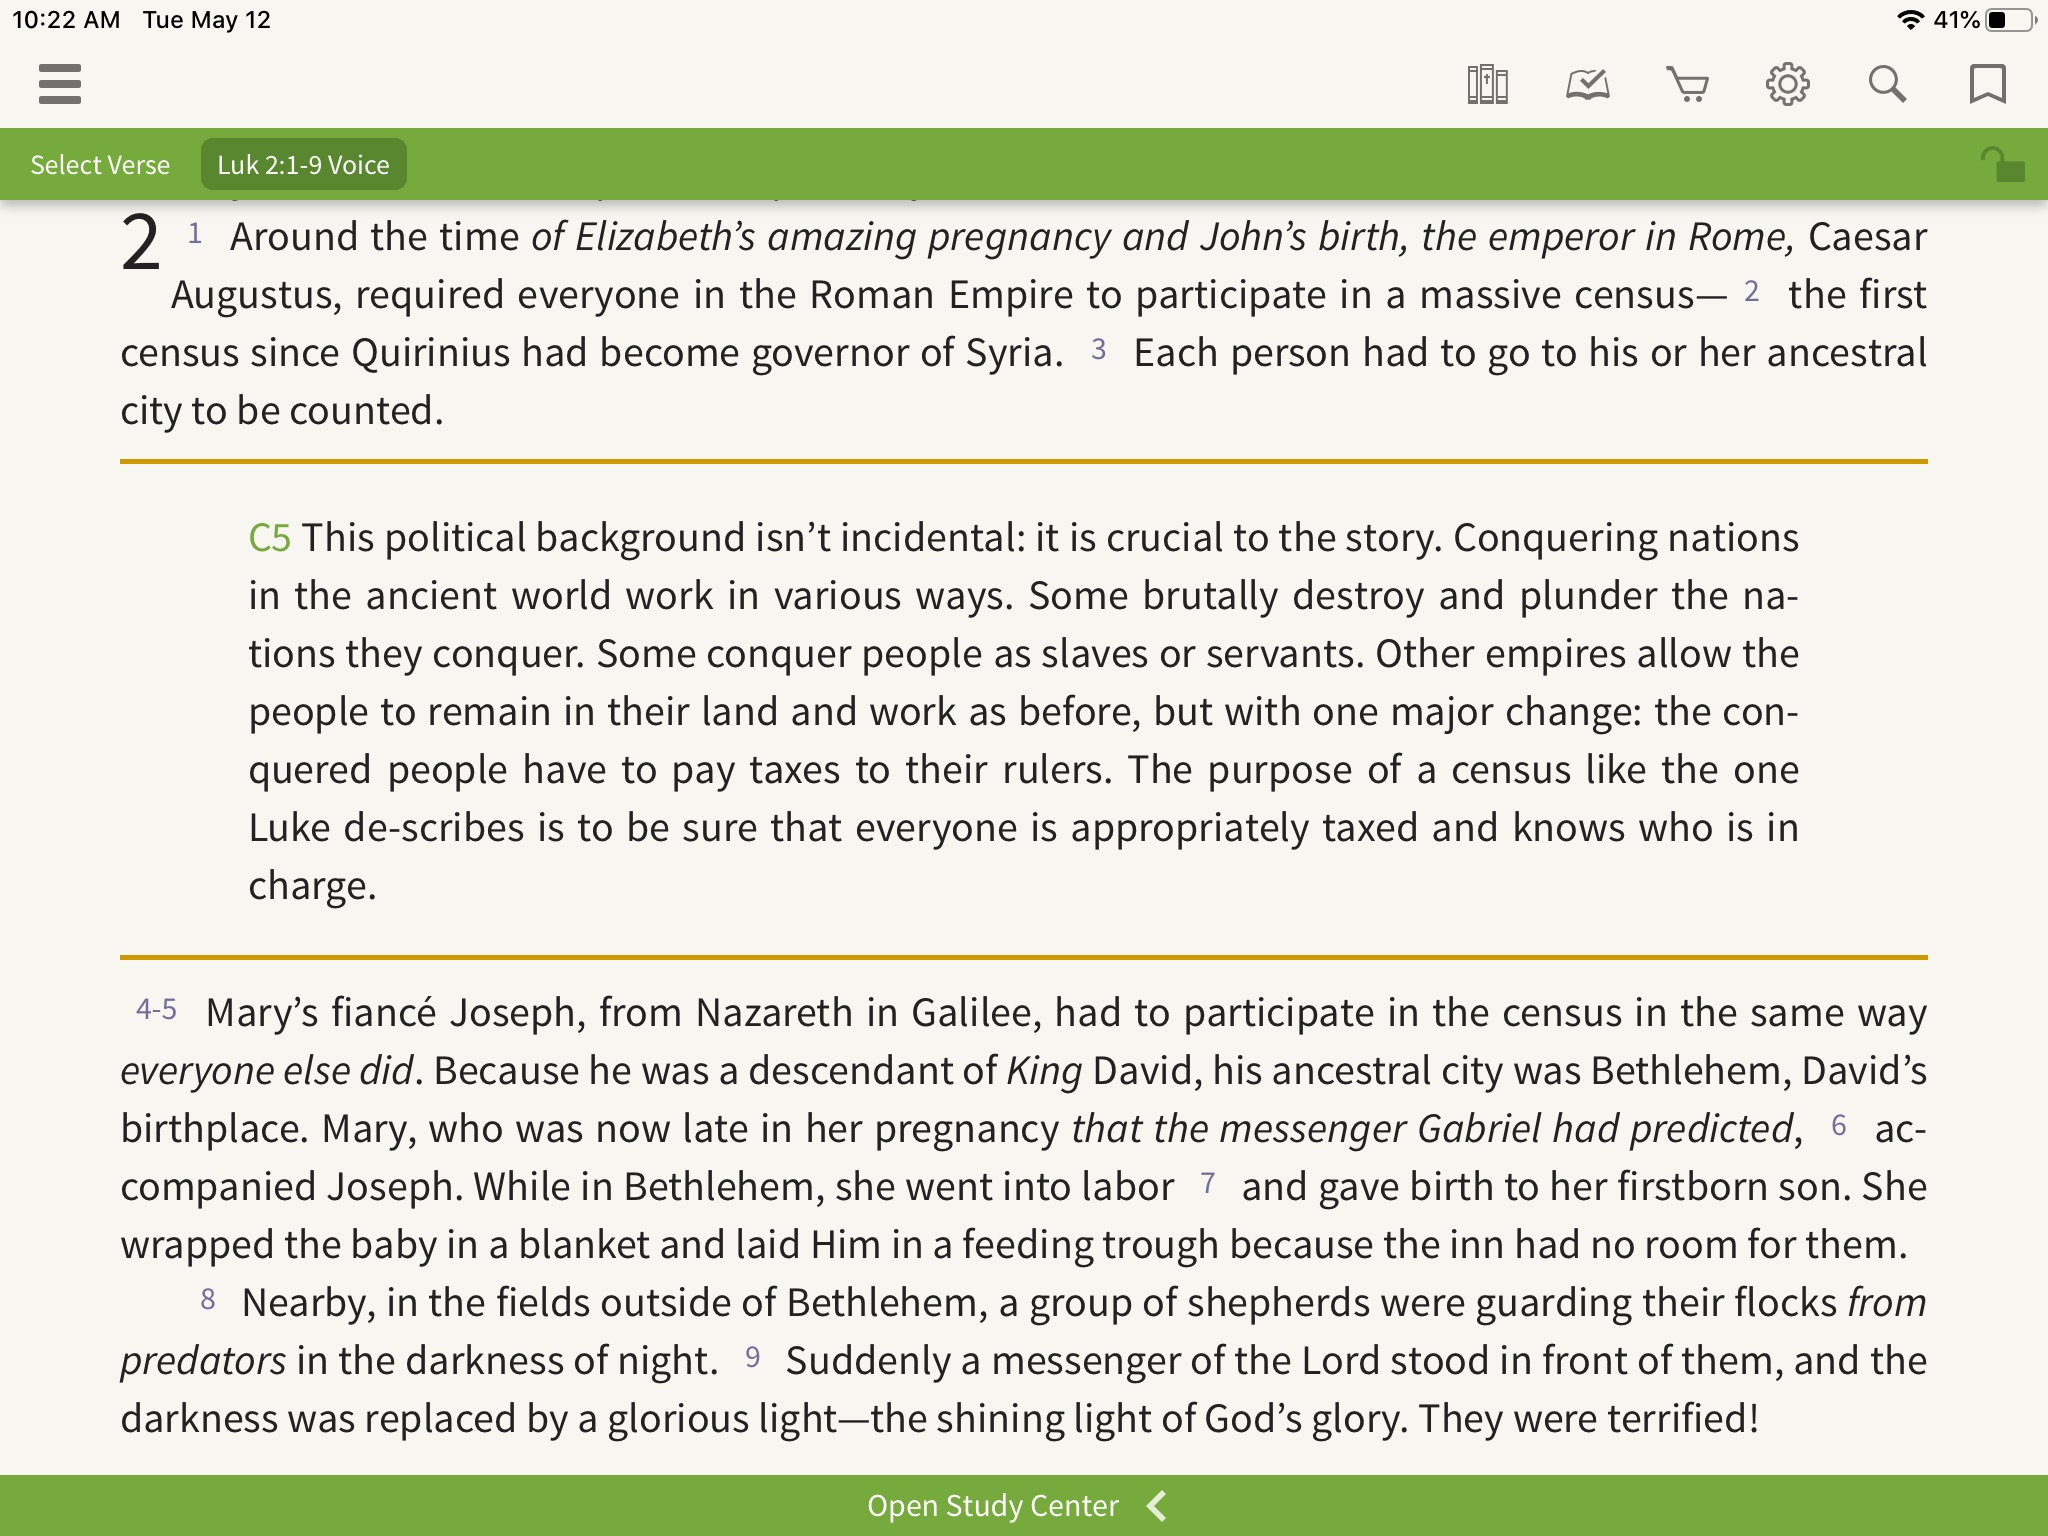 a screenshot from the Olive Tree Bible App, open to Luke 2